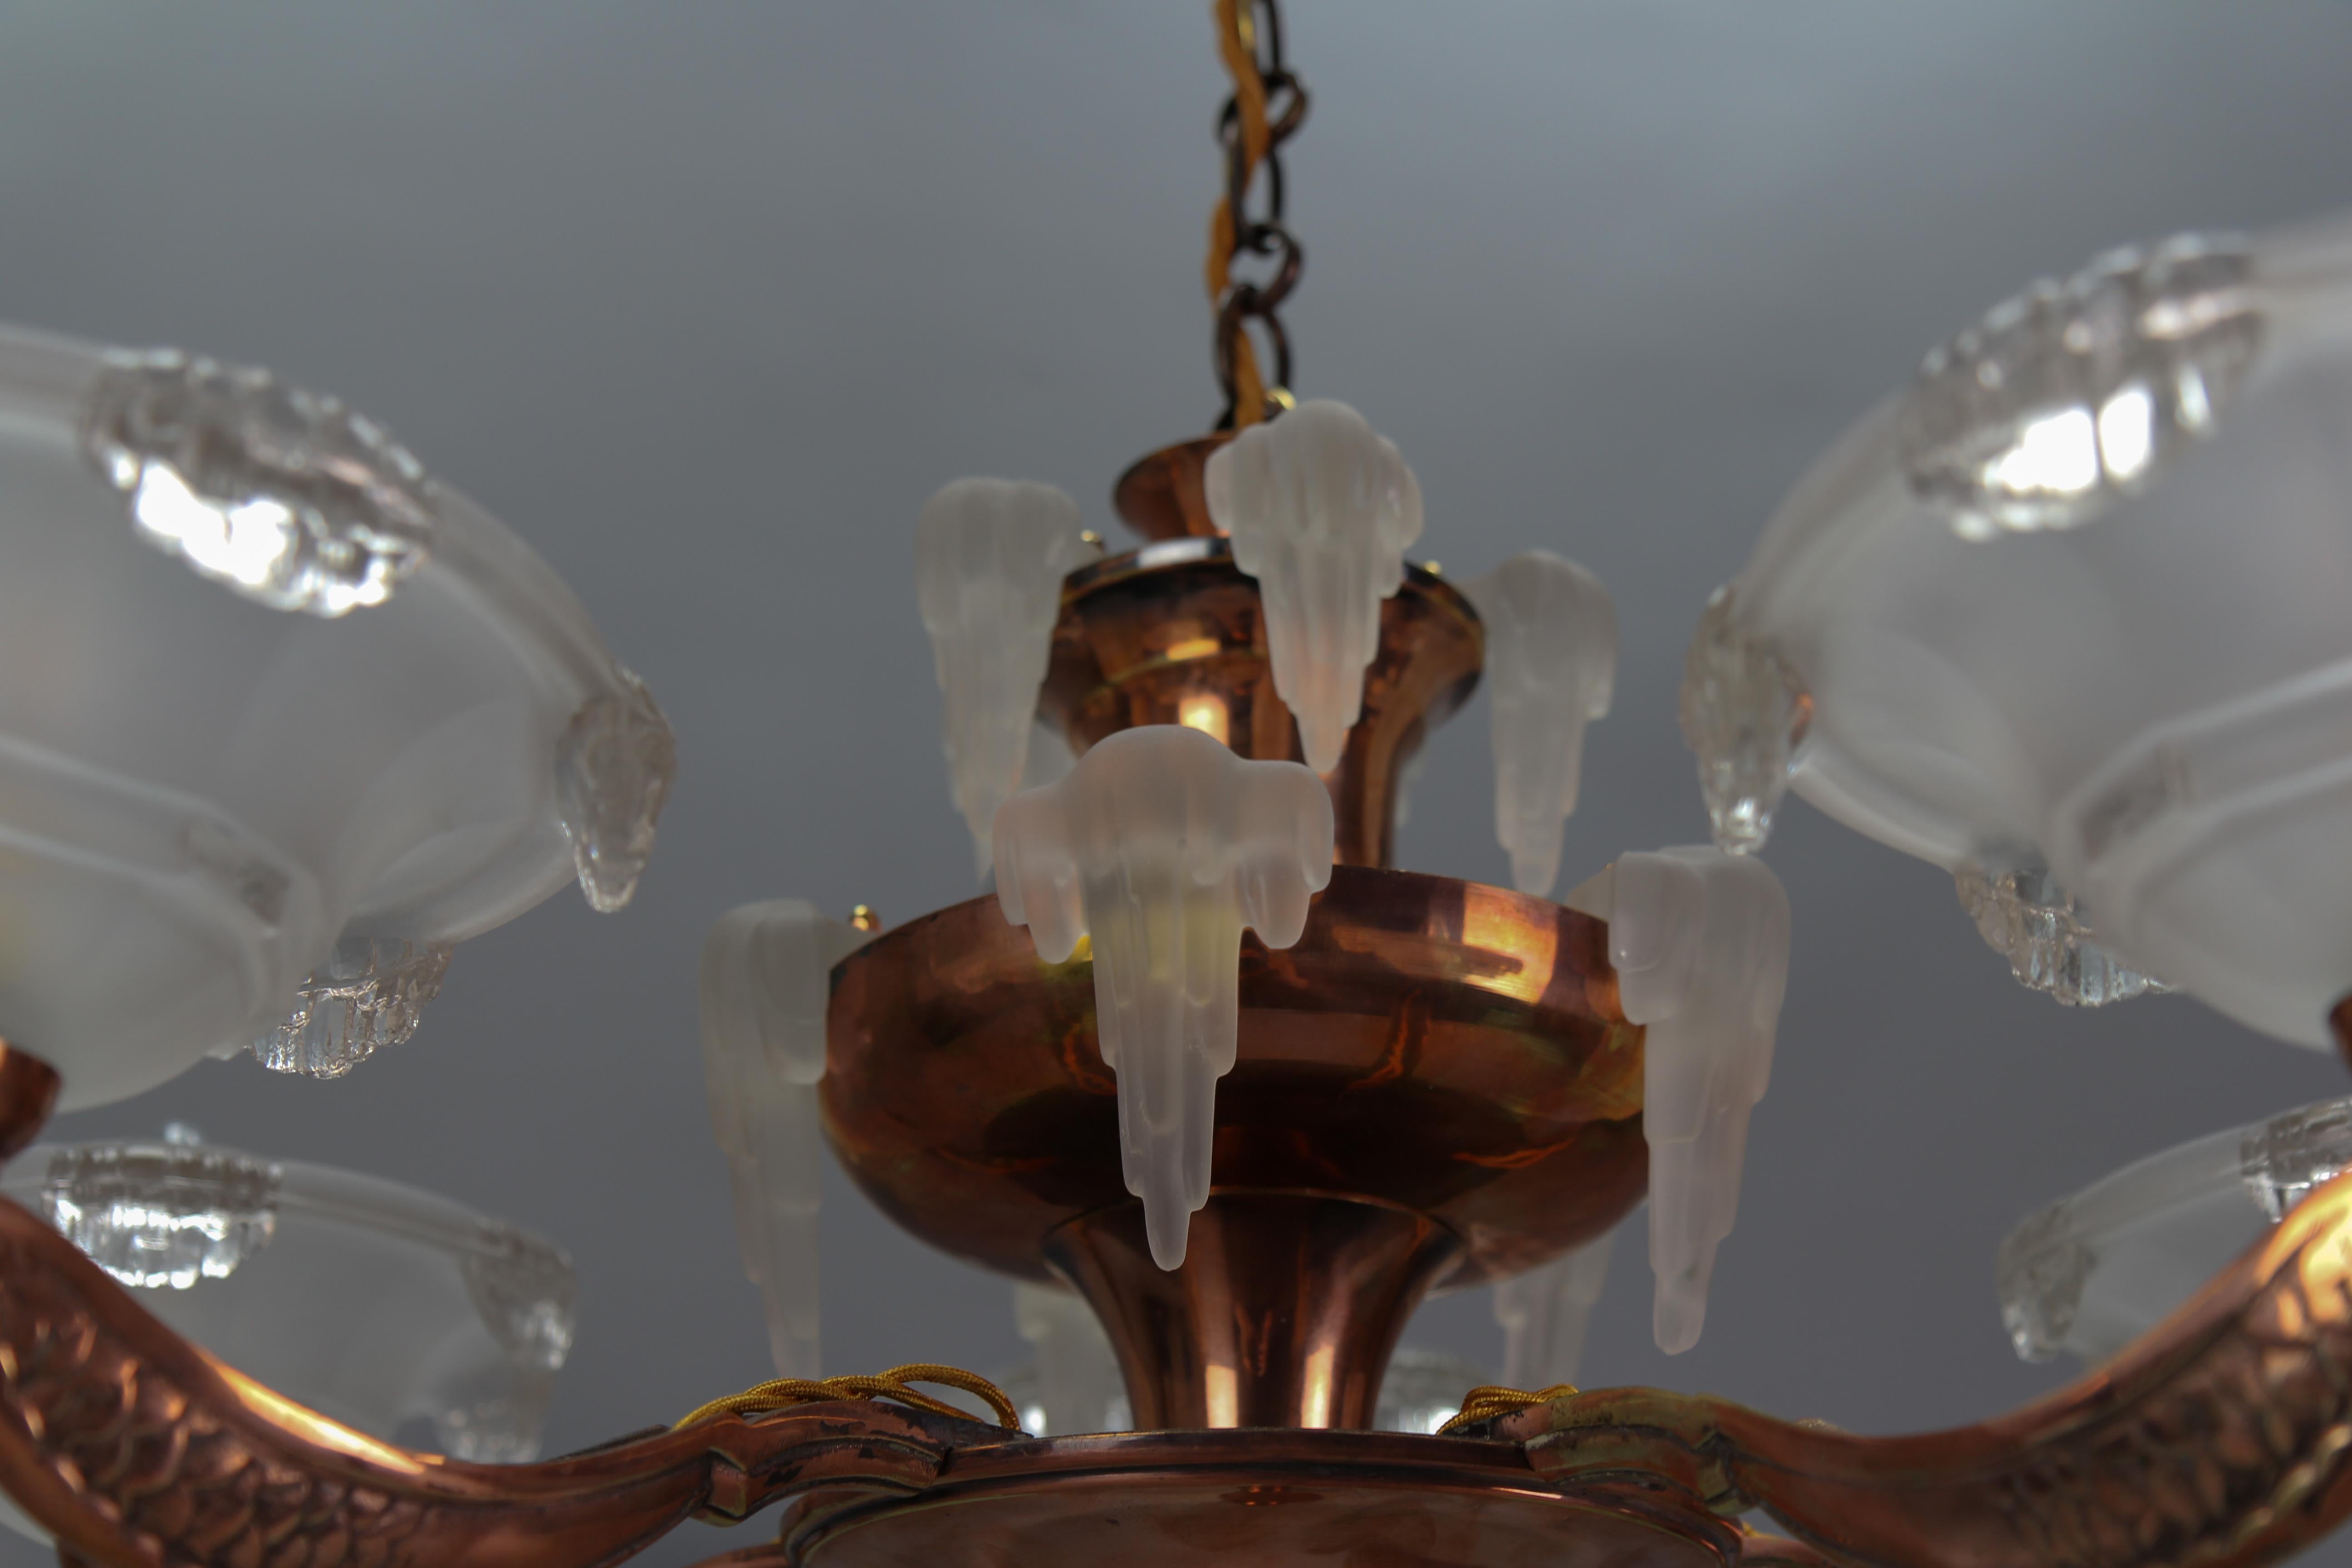 French Art Deco 7-Light Frosted Glass, Brass and Copper Chandelier, 1930s For Sale 4